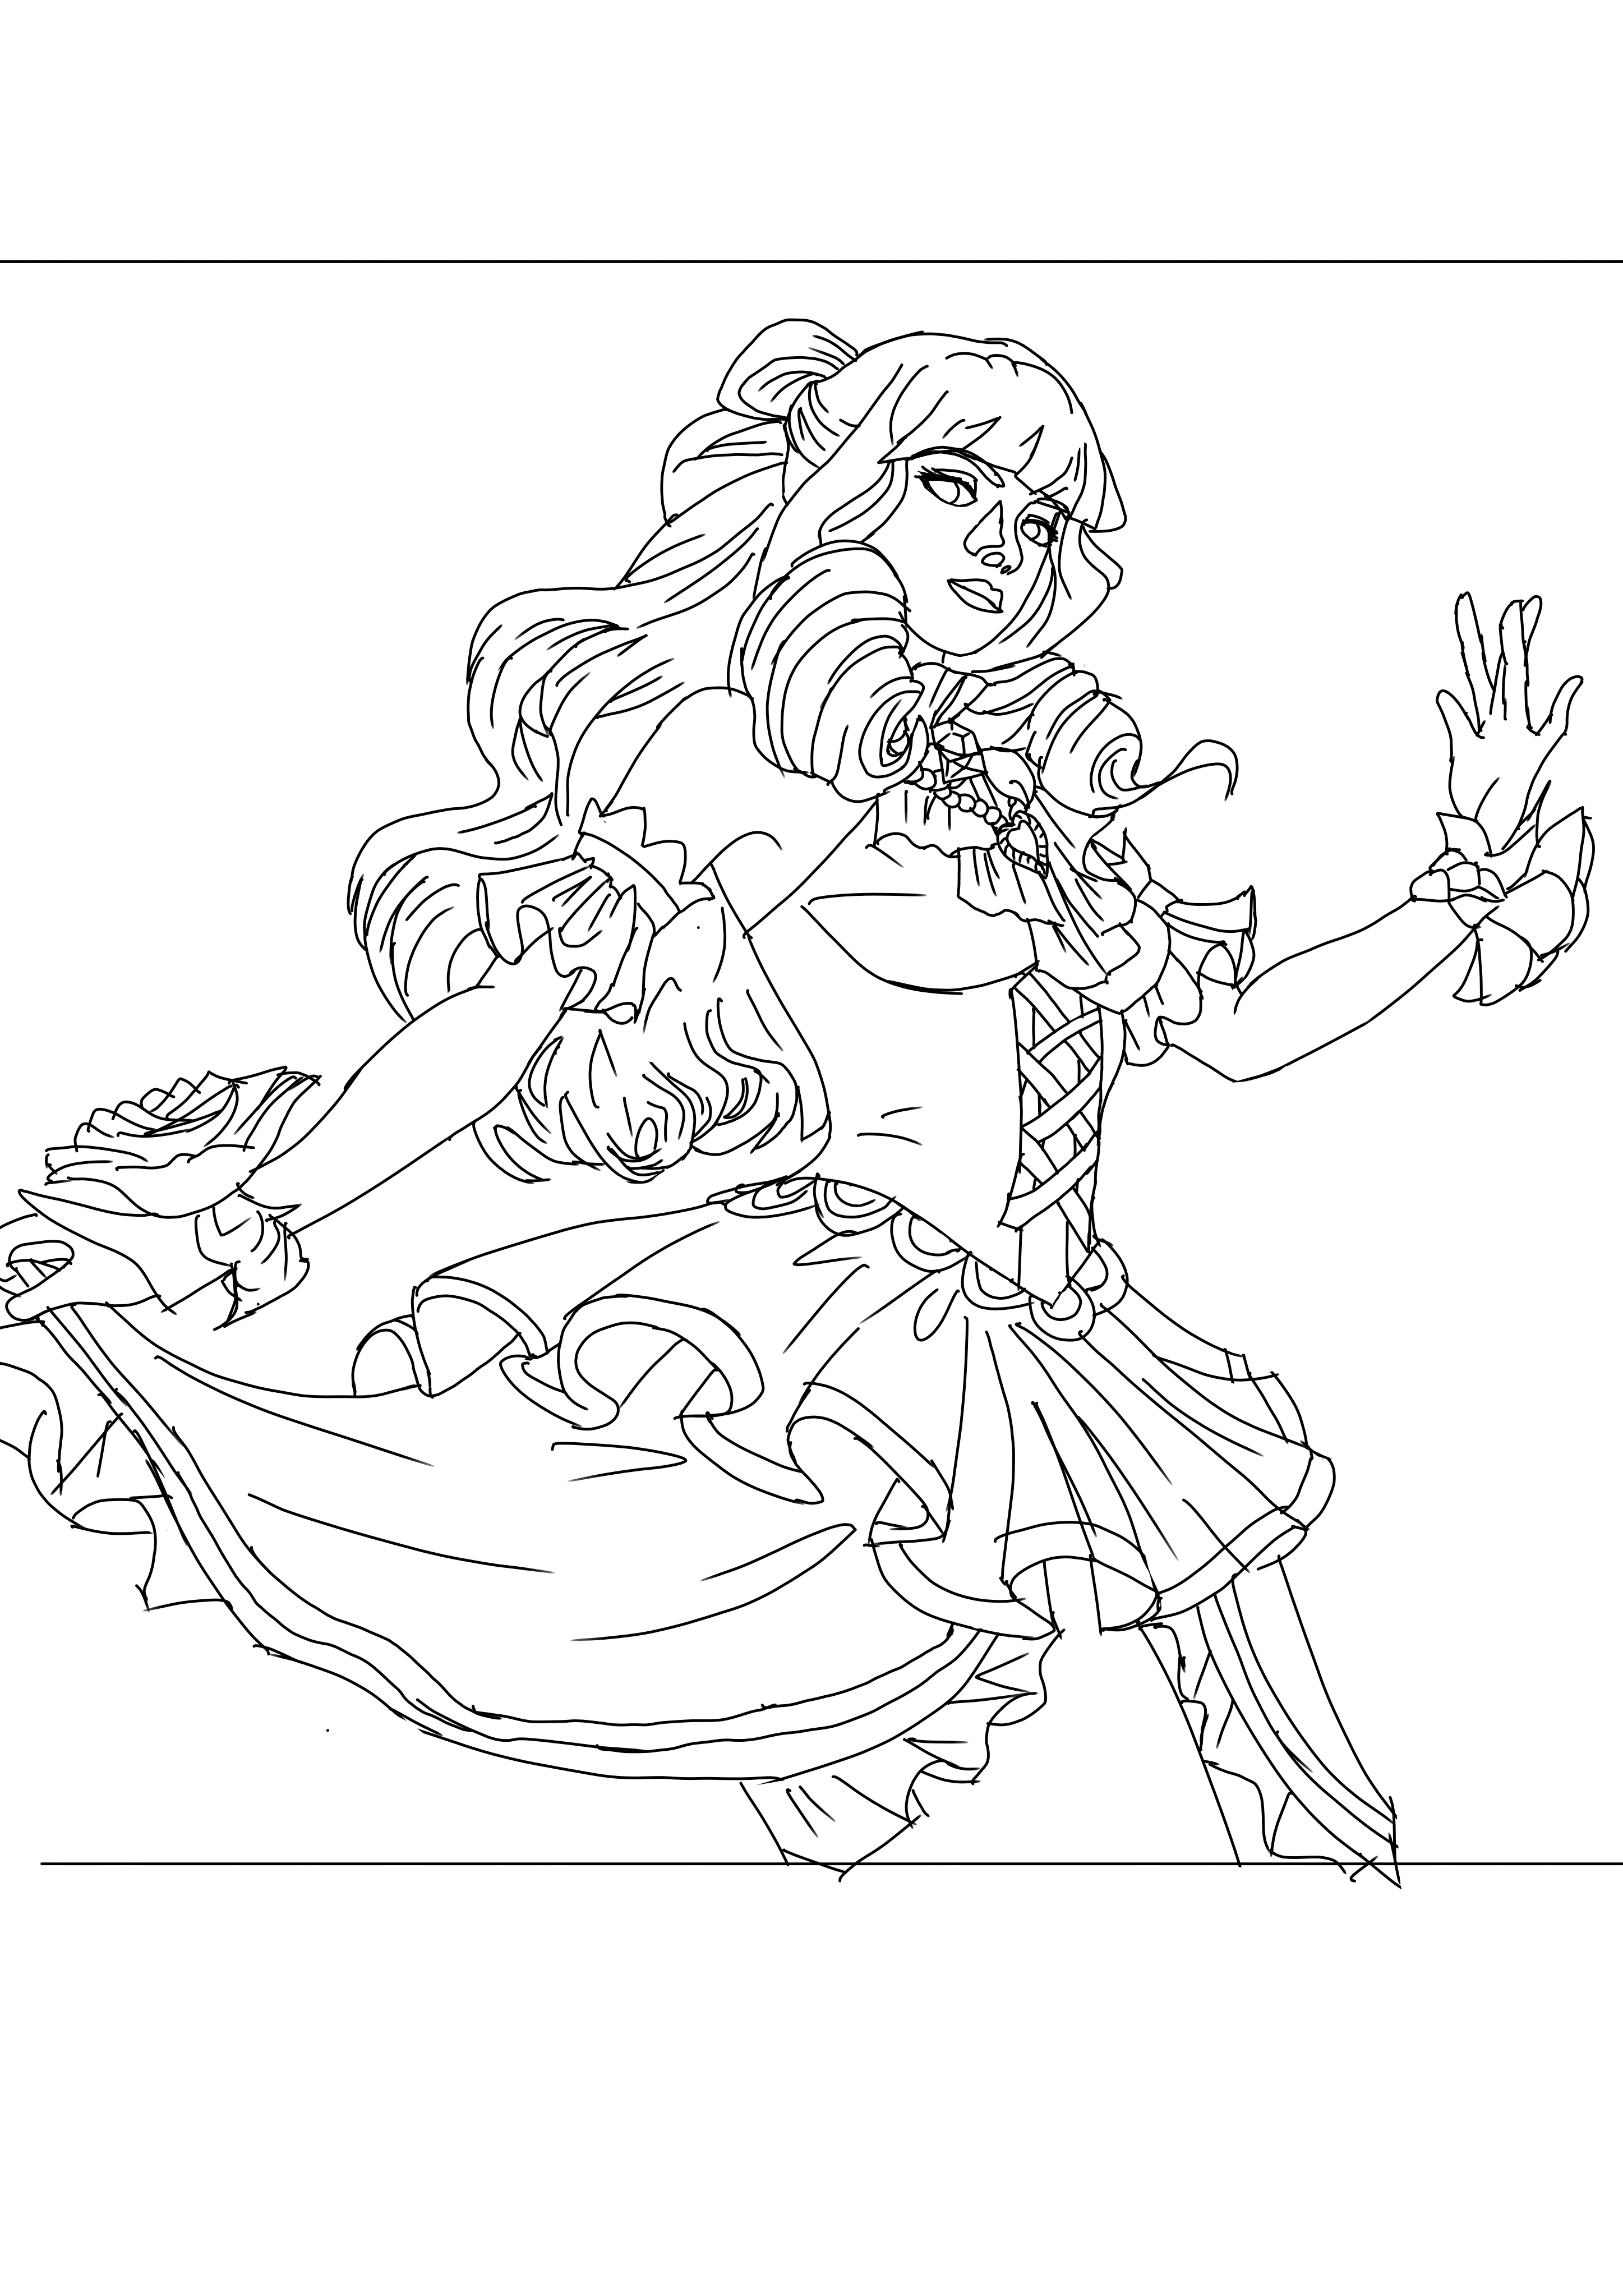 Mobile Legends 15 Coloring Pages